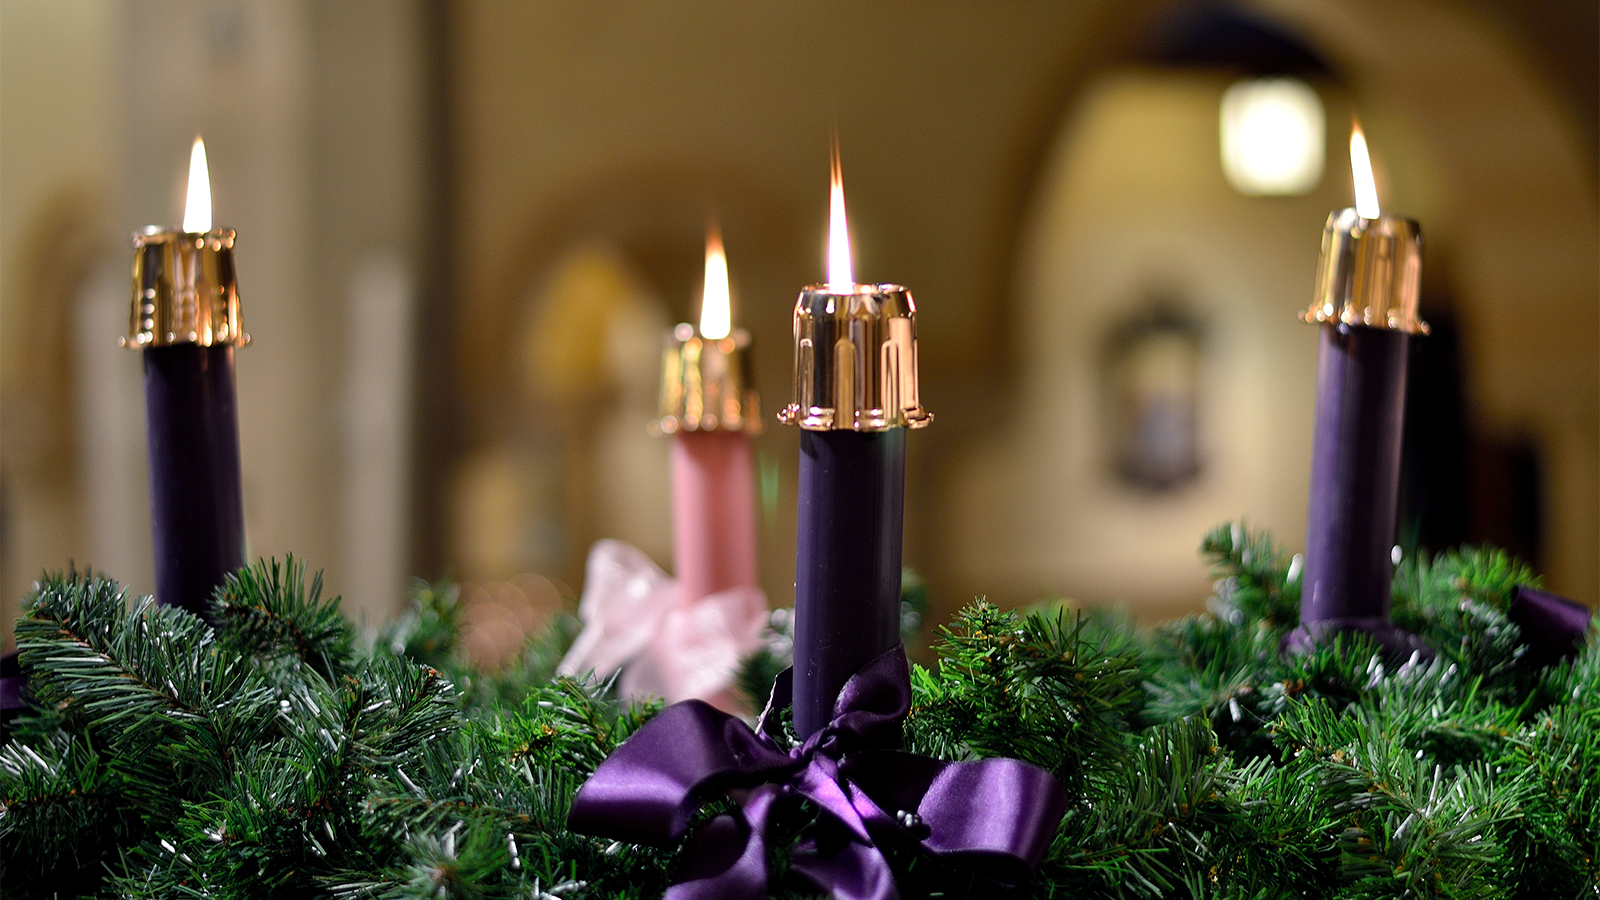 WEB An Fully Lit Advent Wreath. Photo By Steve Grant Creative Commons News Service